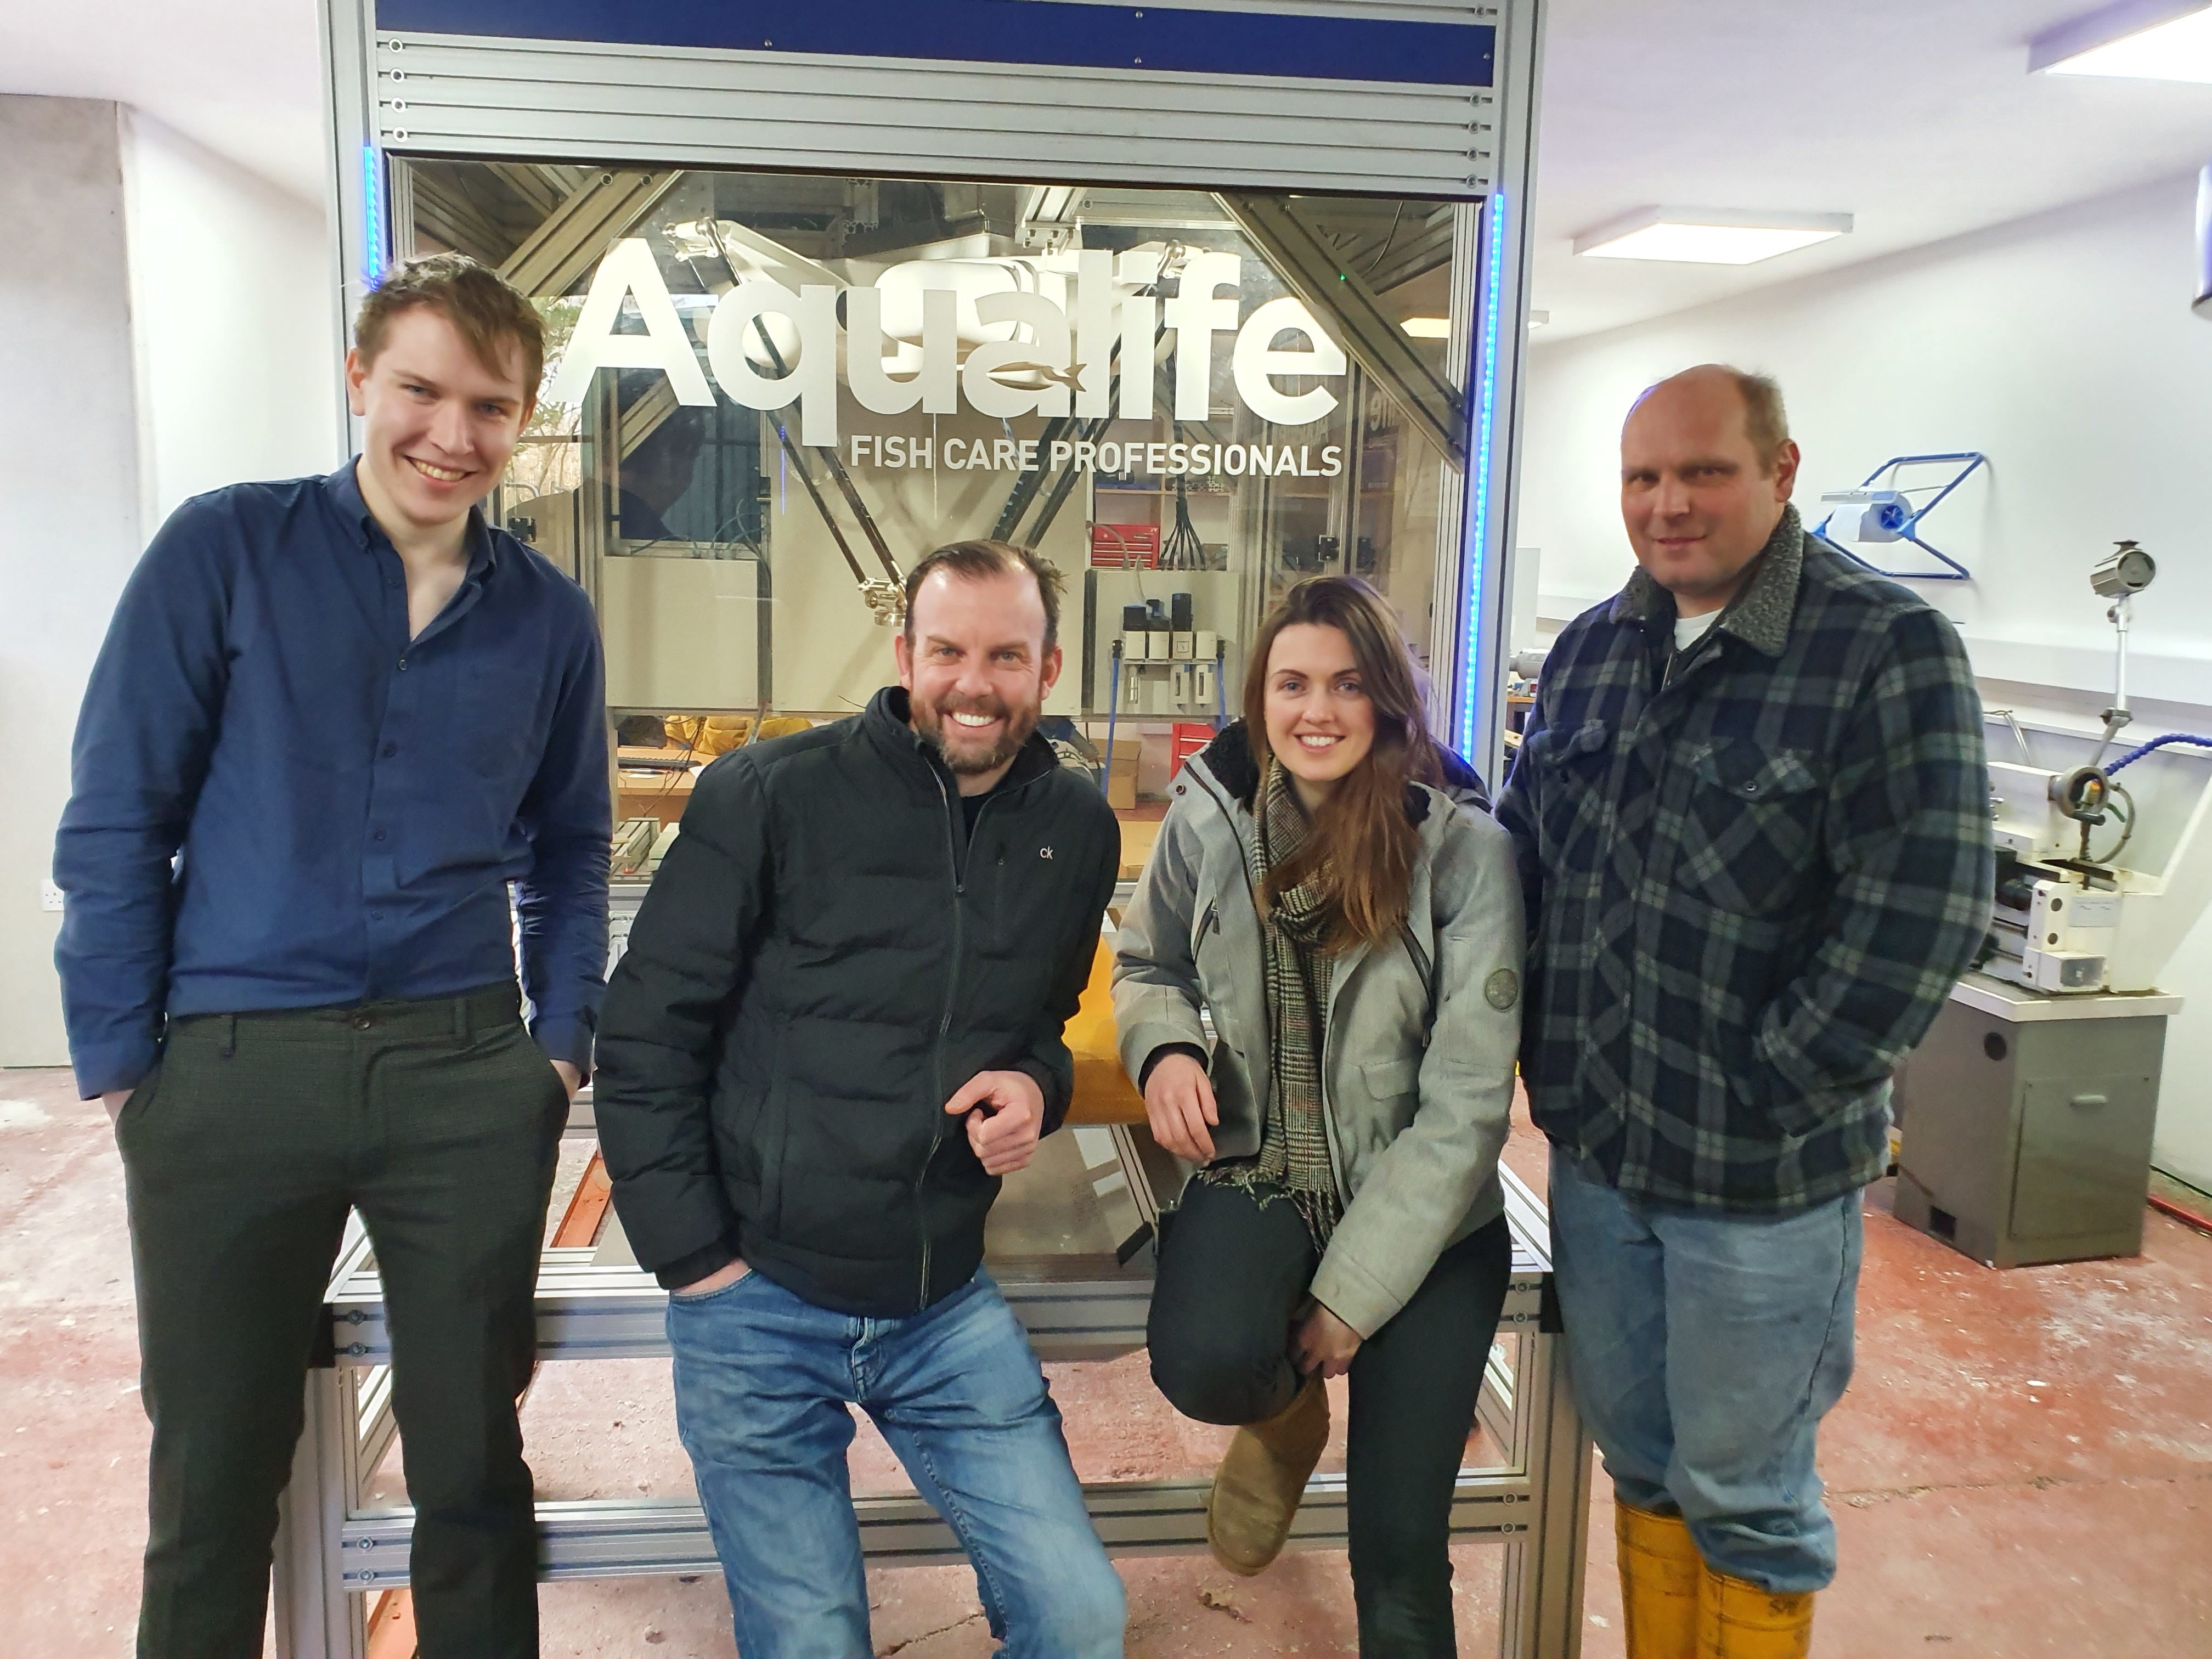 The Aqualife development team (from left to right): Lars Thom (design engineer), Kristian Clezy (head engineer), Susanne Drennan (design engineer)and Phil Brown (technical director) (photo: Aqualife)